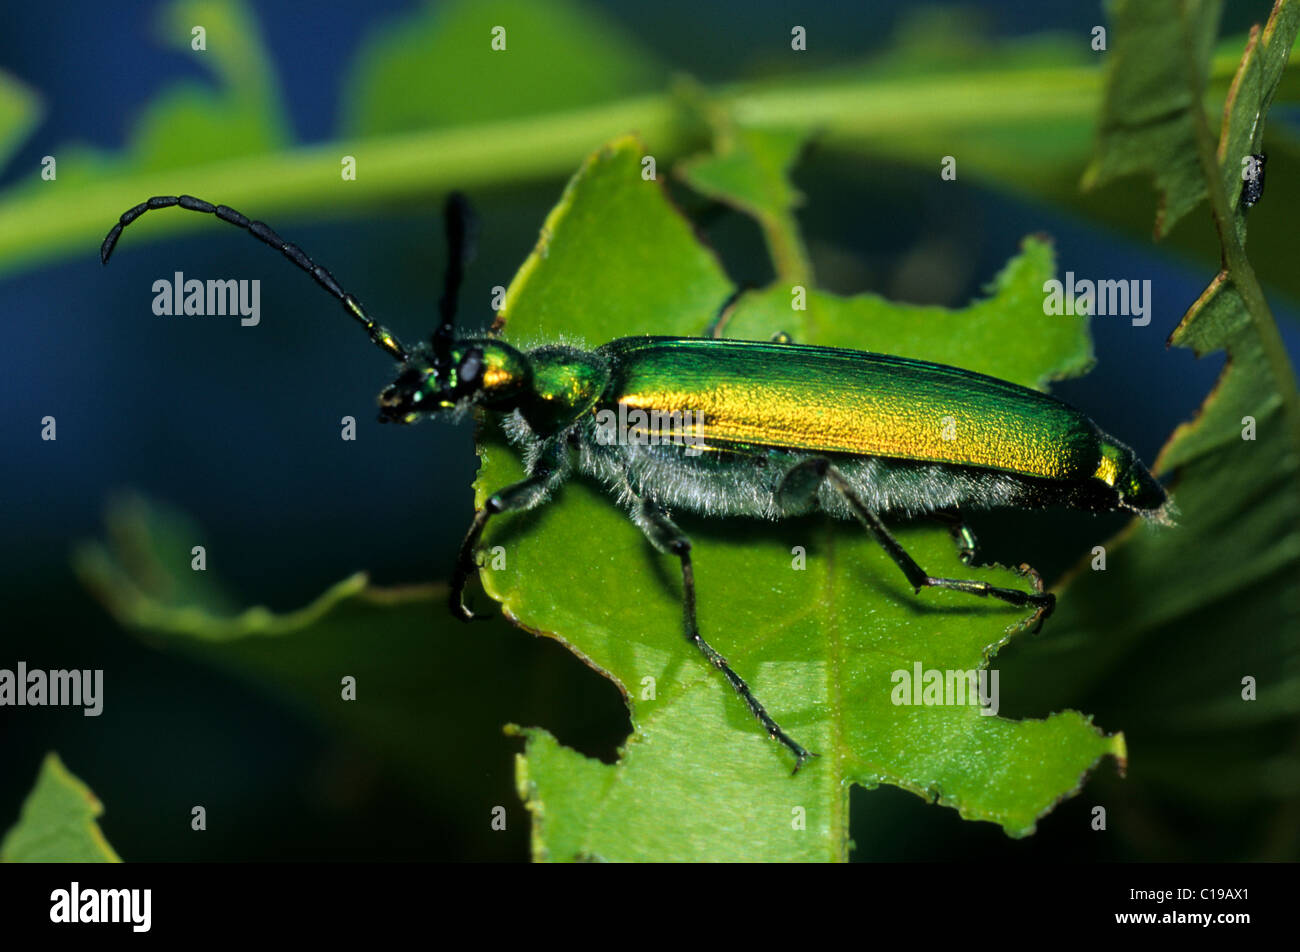 photography fly - images Spanish Alamy stock hi-res and